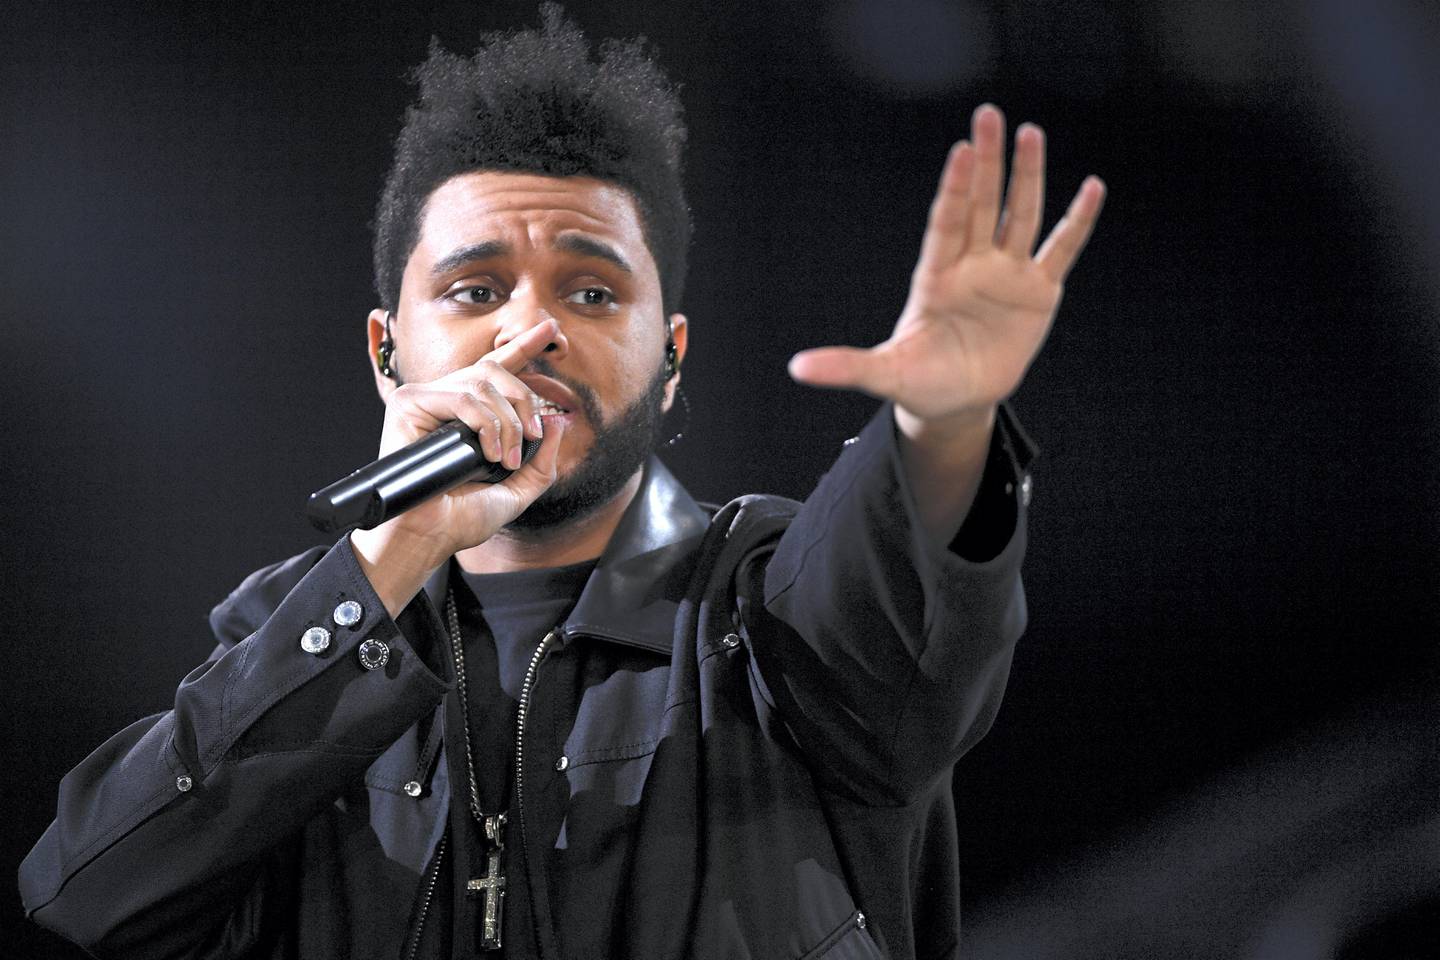 Canadian singer/songwriter The Abel Tesfaye a.k.a The Weeknd performs during the 2016 Victoria's Secret Fashion Show at the Grand Palais in Paris on November 30, 2016.  / AFP PHOTO / Martin BUREAU / RESTRICTED TO EDITORIAL USE